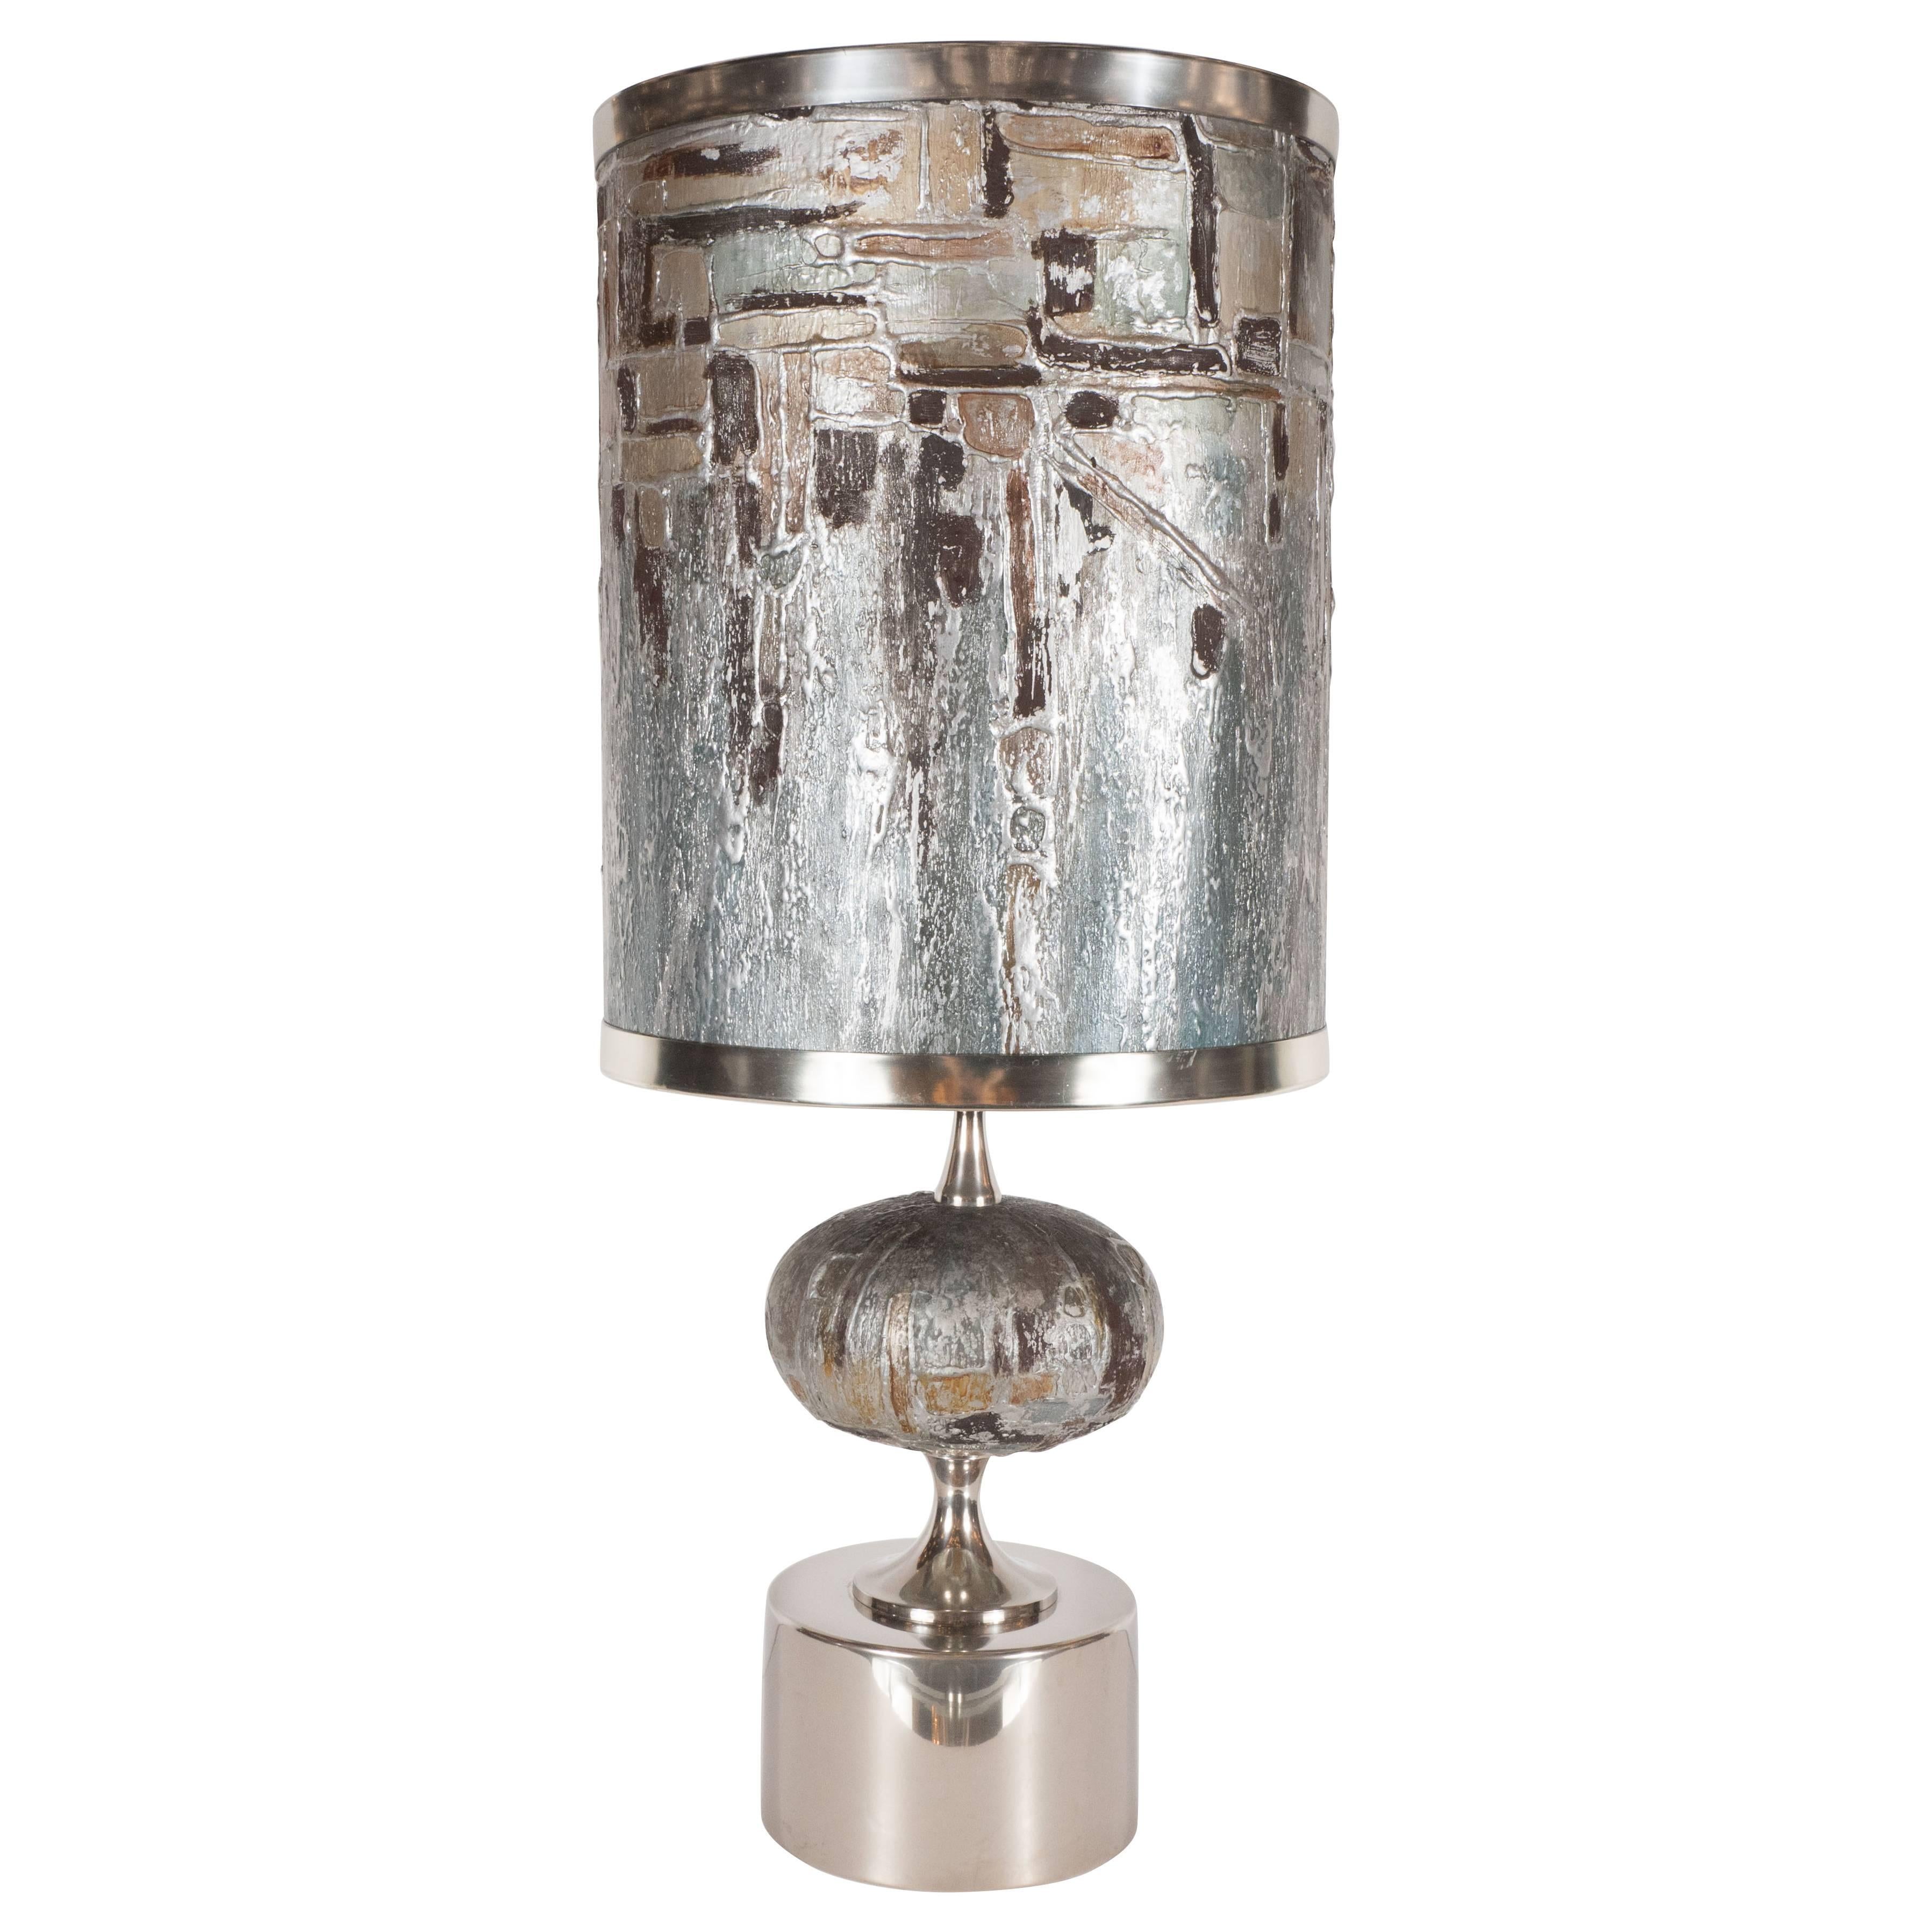 French Mid-Century Modern Handmade Painted Table Lamp with Nickel Fittings